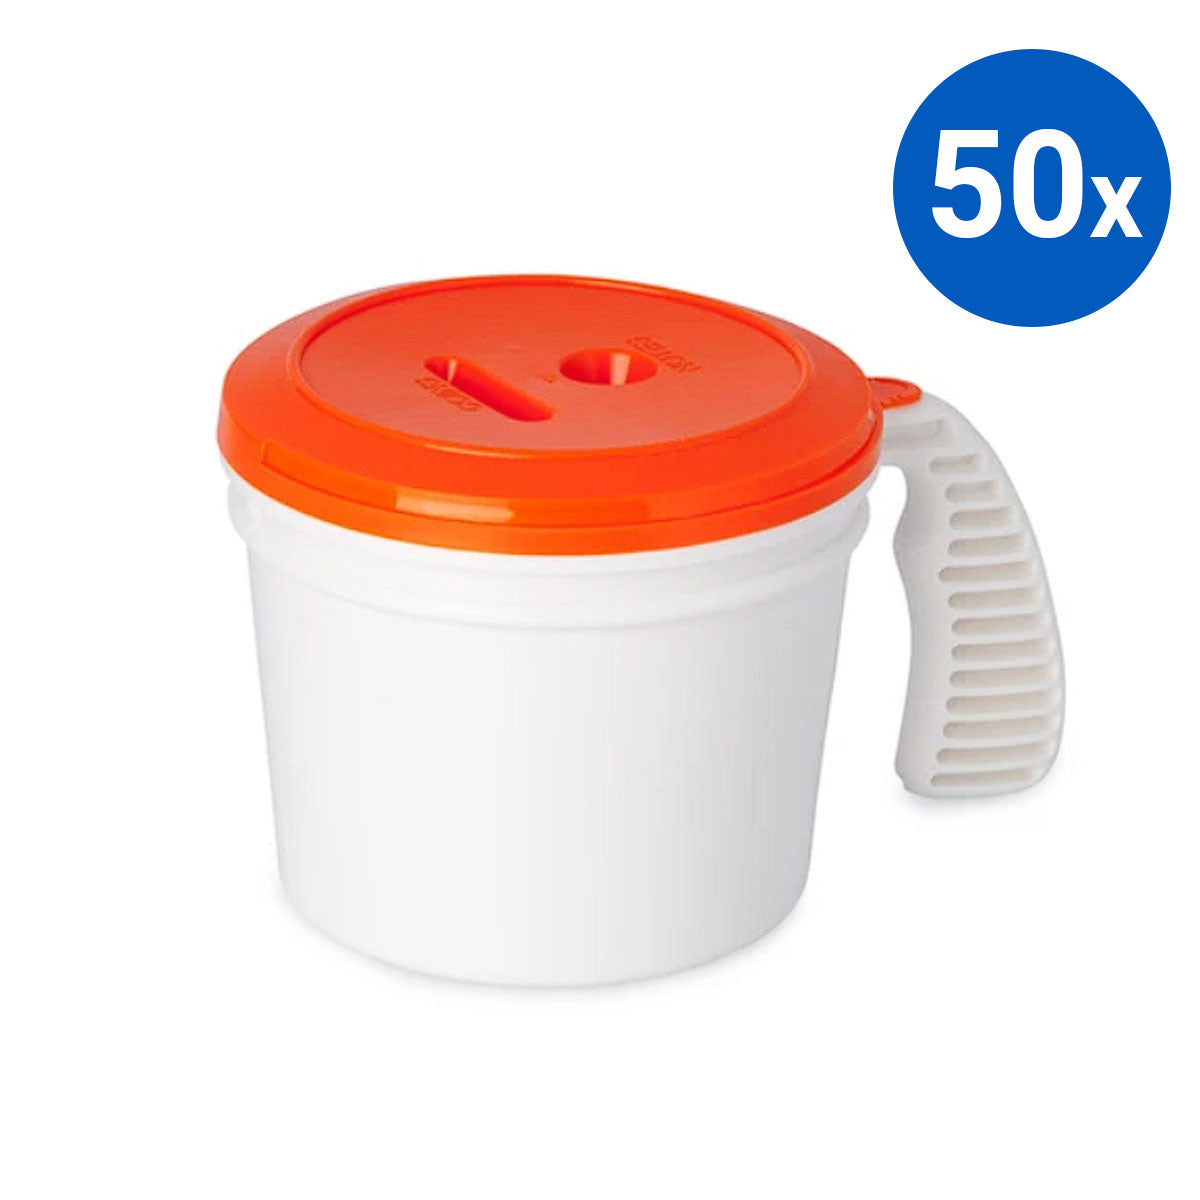 50x Collection Container Base and Standard Lid - Orange